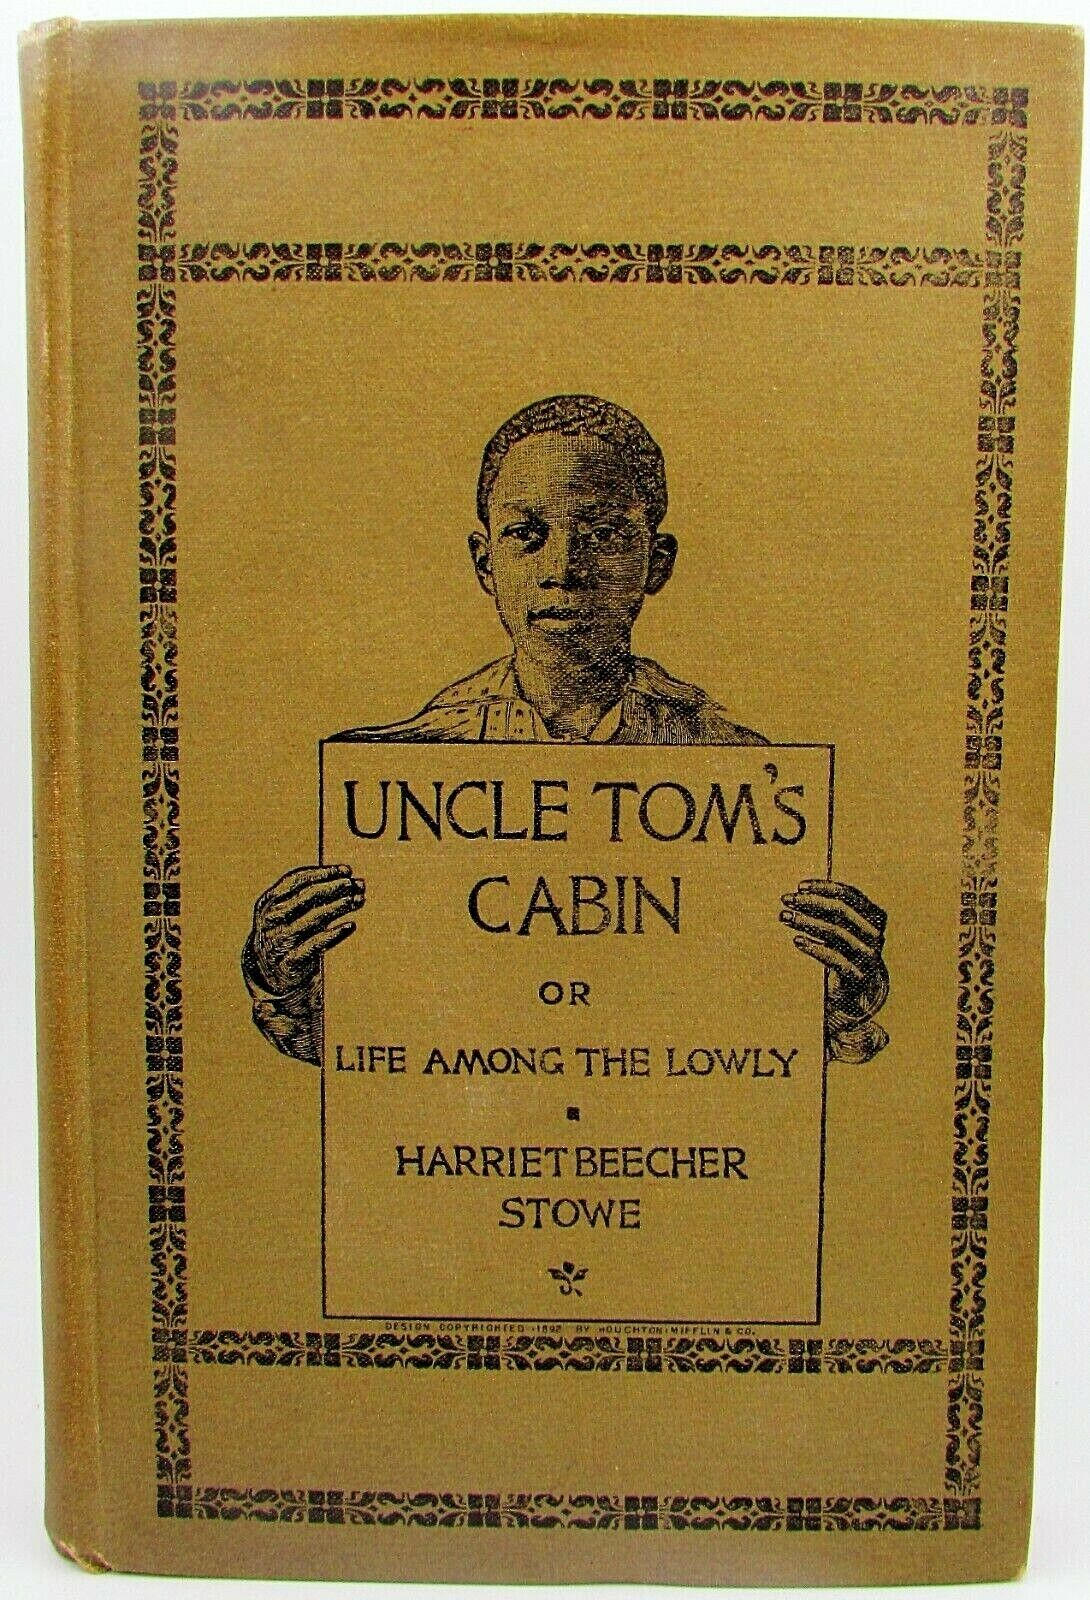 UNCLE TOM'S CABIN Life Among the Lowly Harriet Beecher Stowe 1892 Universal Ed.